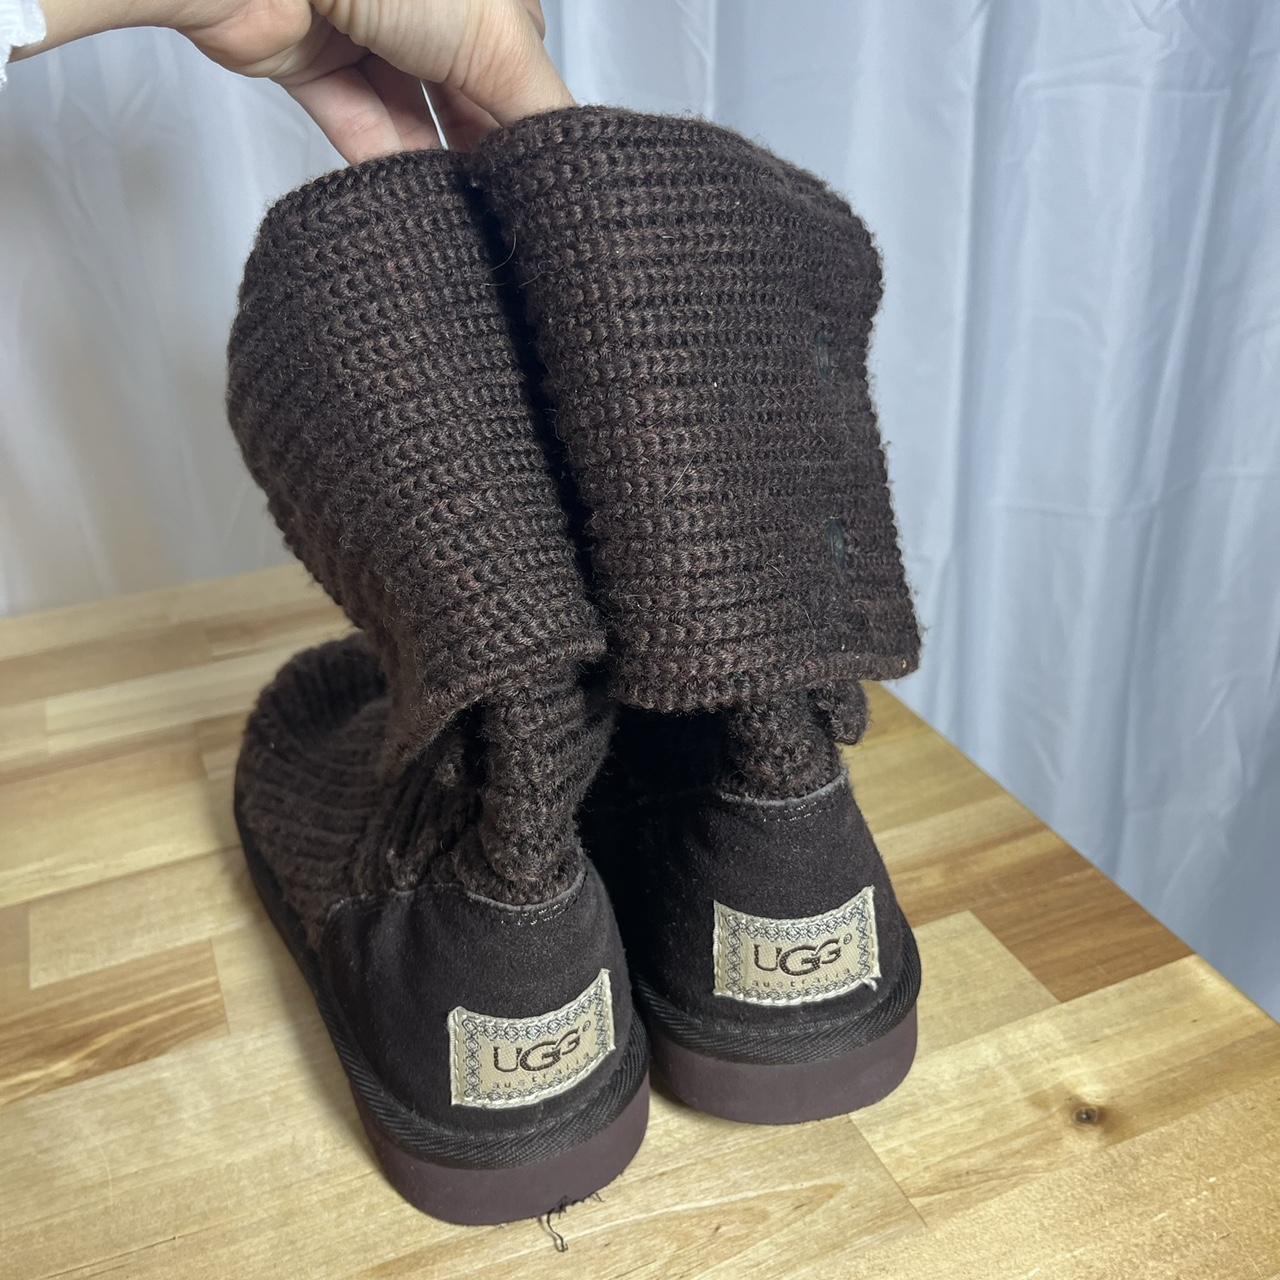 Discontinued Knit fold over Uggs in Brown Vintage... - Depop